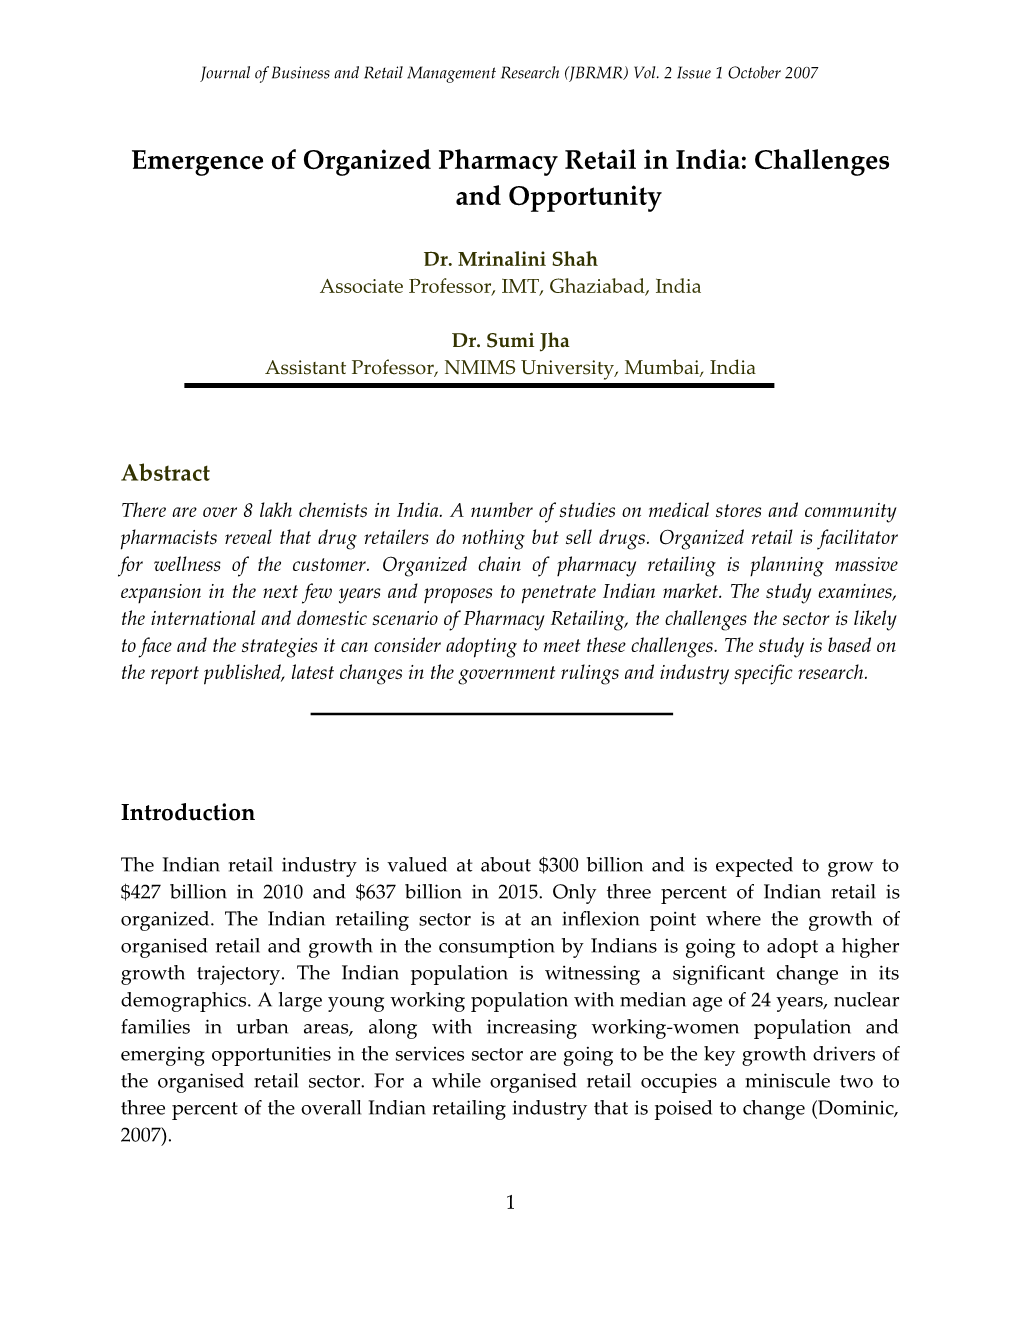 Emergence of Organized Pharmacy Retail in India: Challenges and Opportunity